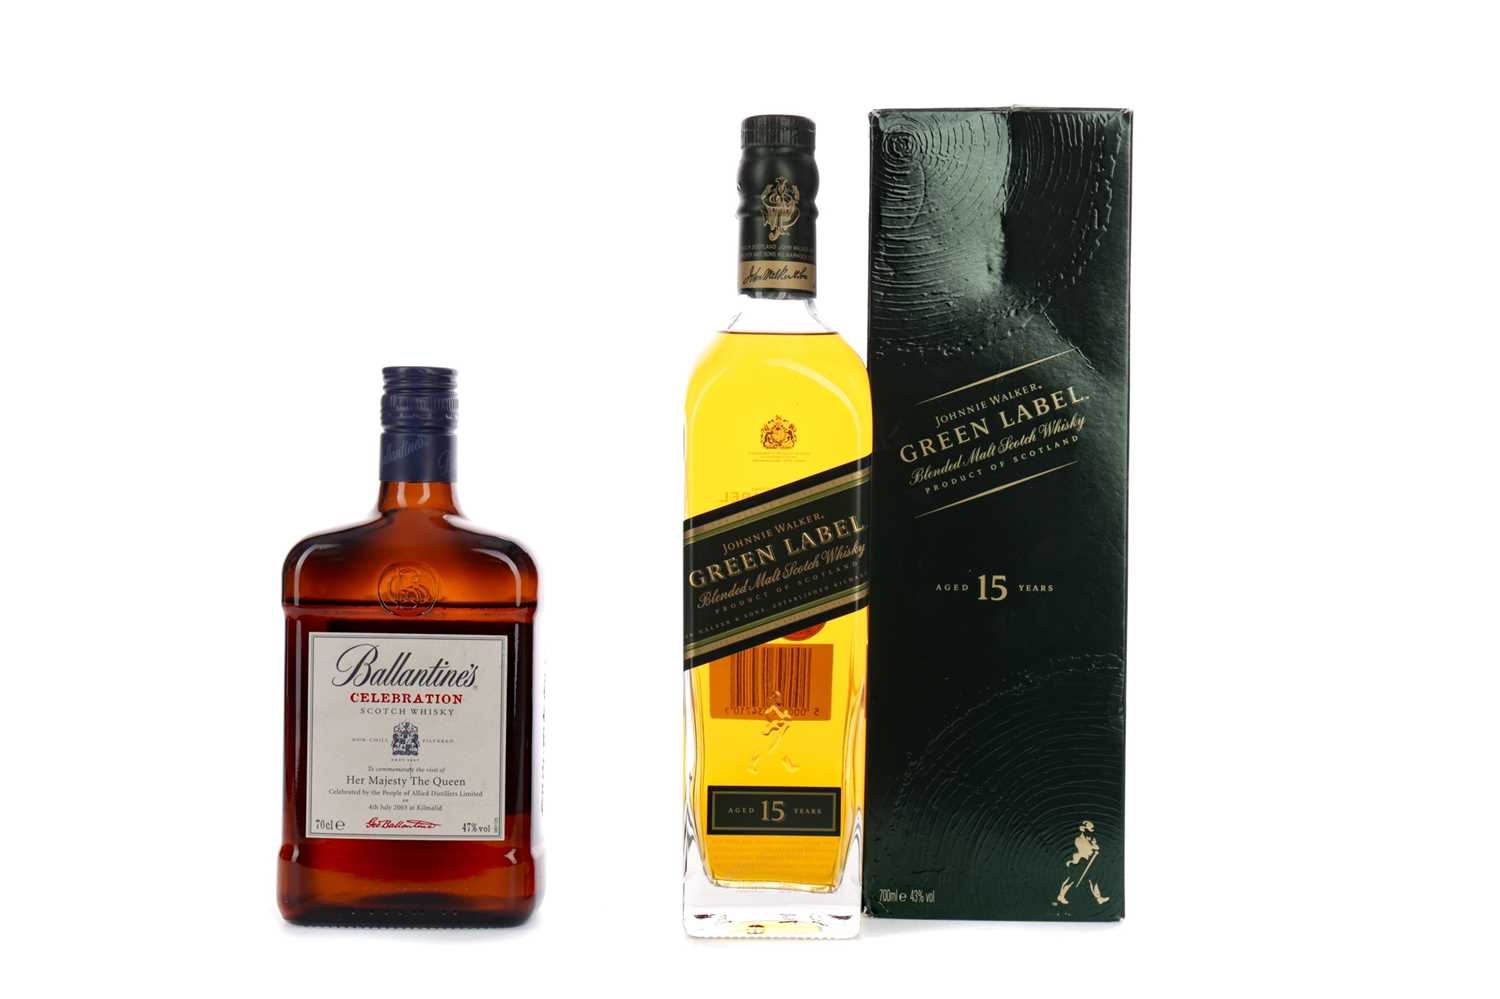 Lot 120 - JOHNNIE WALKER GREEN LABEL AGED 15 YEARS AND BALLANTINE'S CELEBRATION